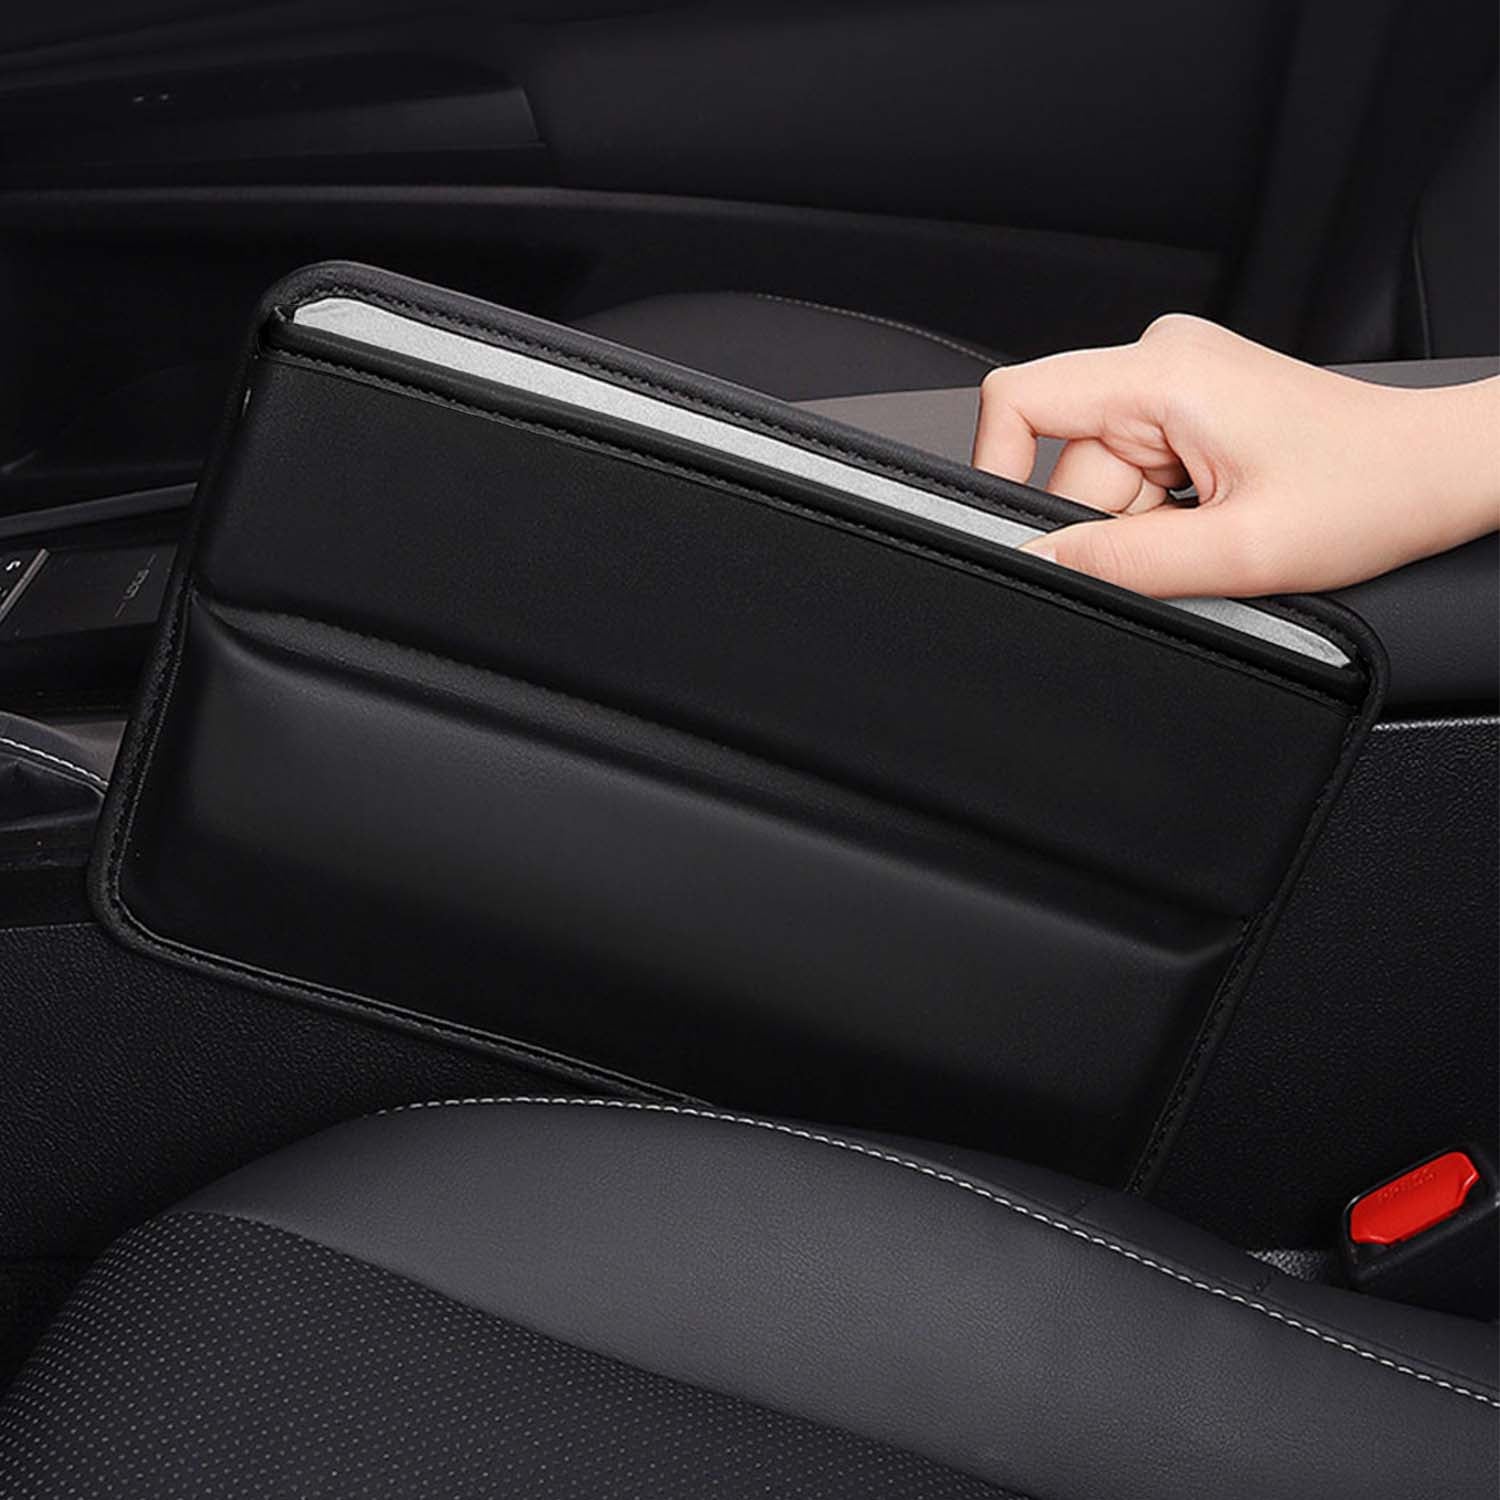 Delicate Leather Car Seat Gap Filler Organizer, Custom Fir For Your Cars, Multifunctional PU Leather Console Side Pocket Organizer for Cellphones, Cards, Wallets, Keys - Delicate Leather